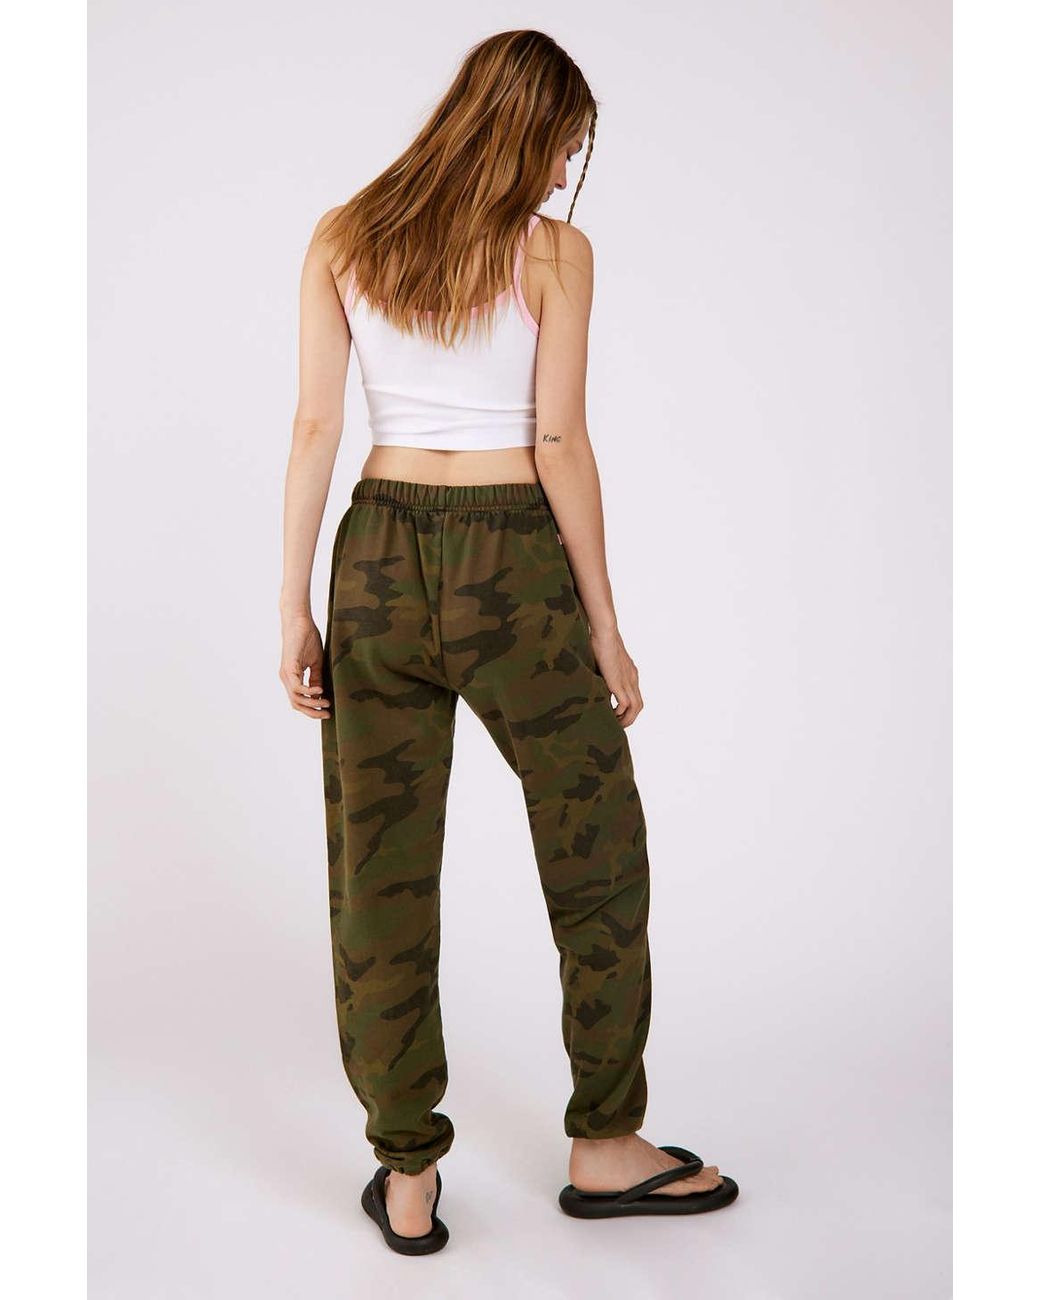 The Mayfair Group Uo Exclusive Tumblr Famous Sweatpant | Lyst